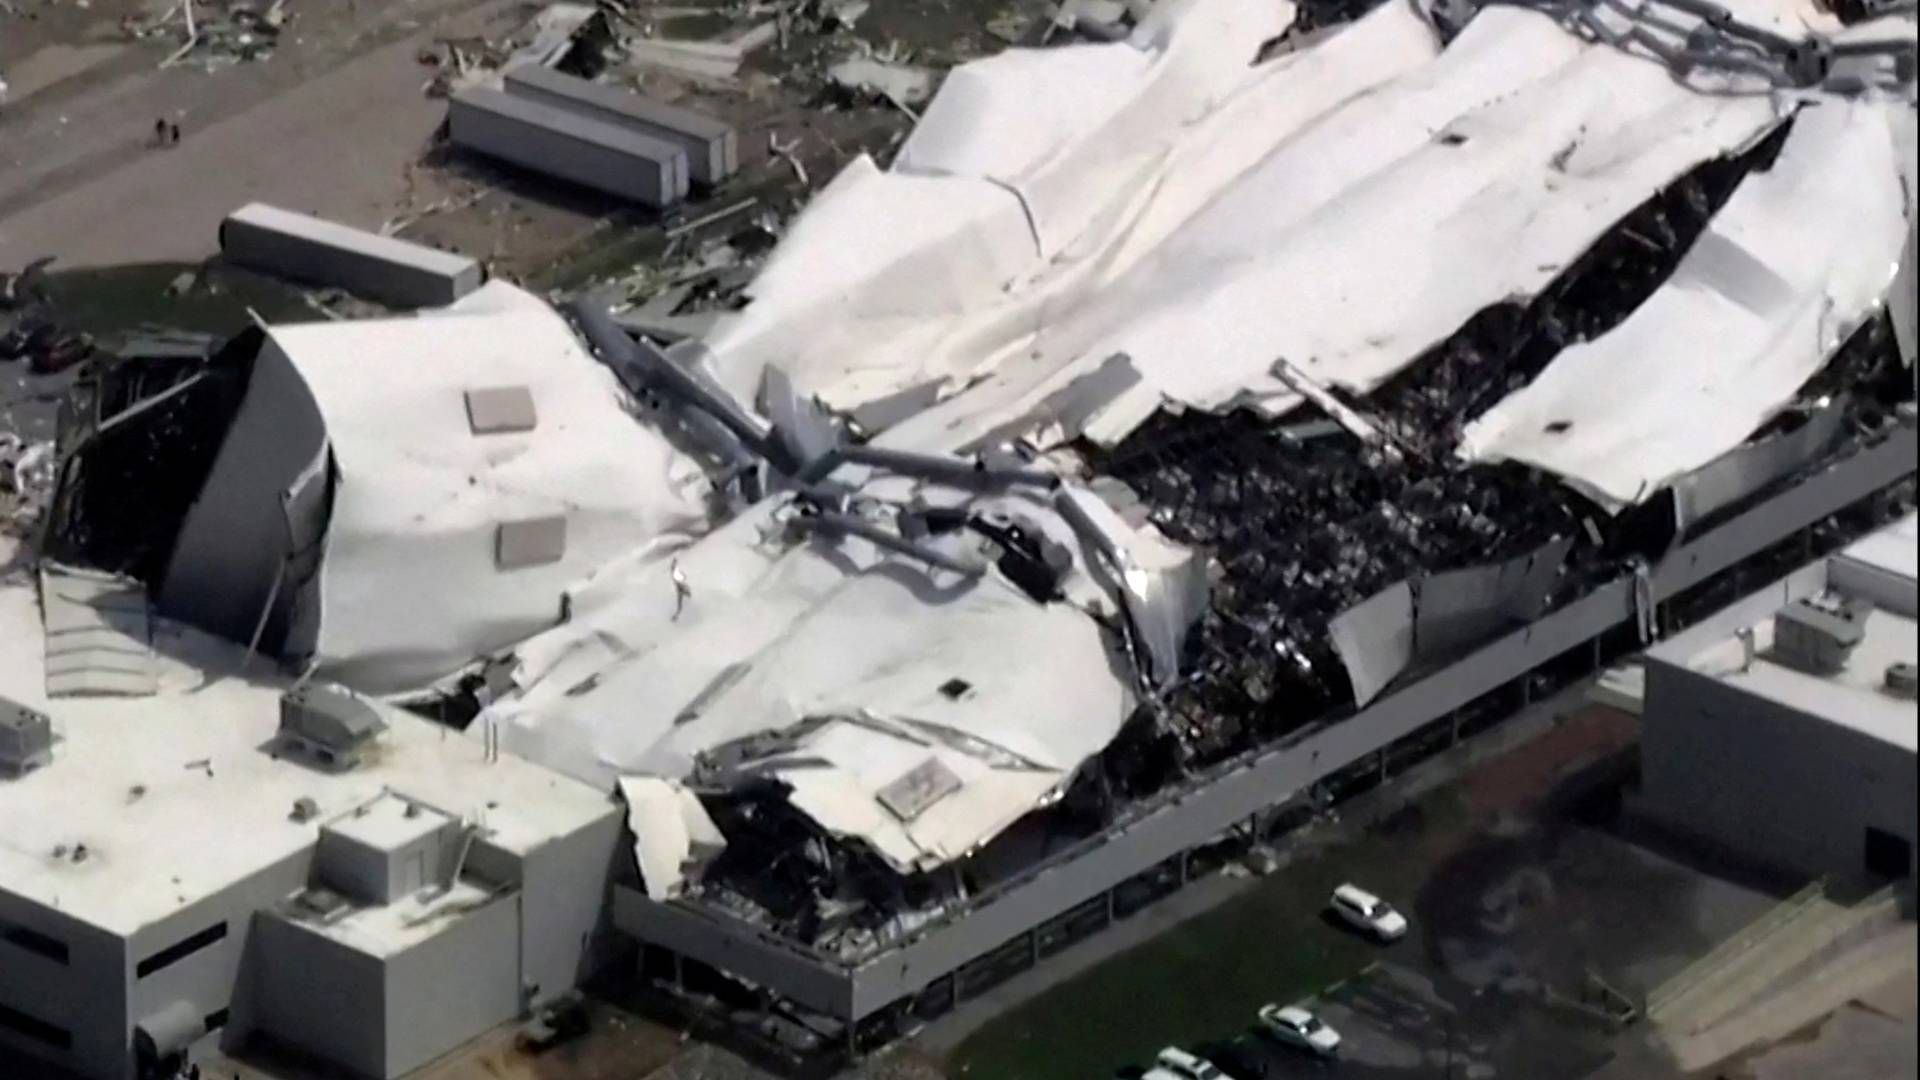 Images of a Pfizer facility show extensive roof damage after a tornado passed through the area in Rocky Mount, North Carolina, USA on July 19. | Photo: Abc Affiliate Wtvd